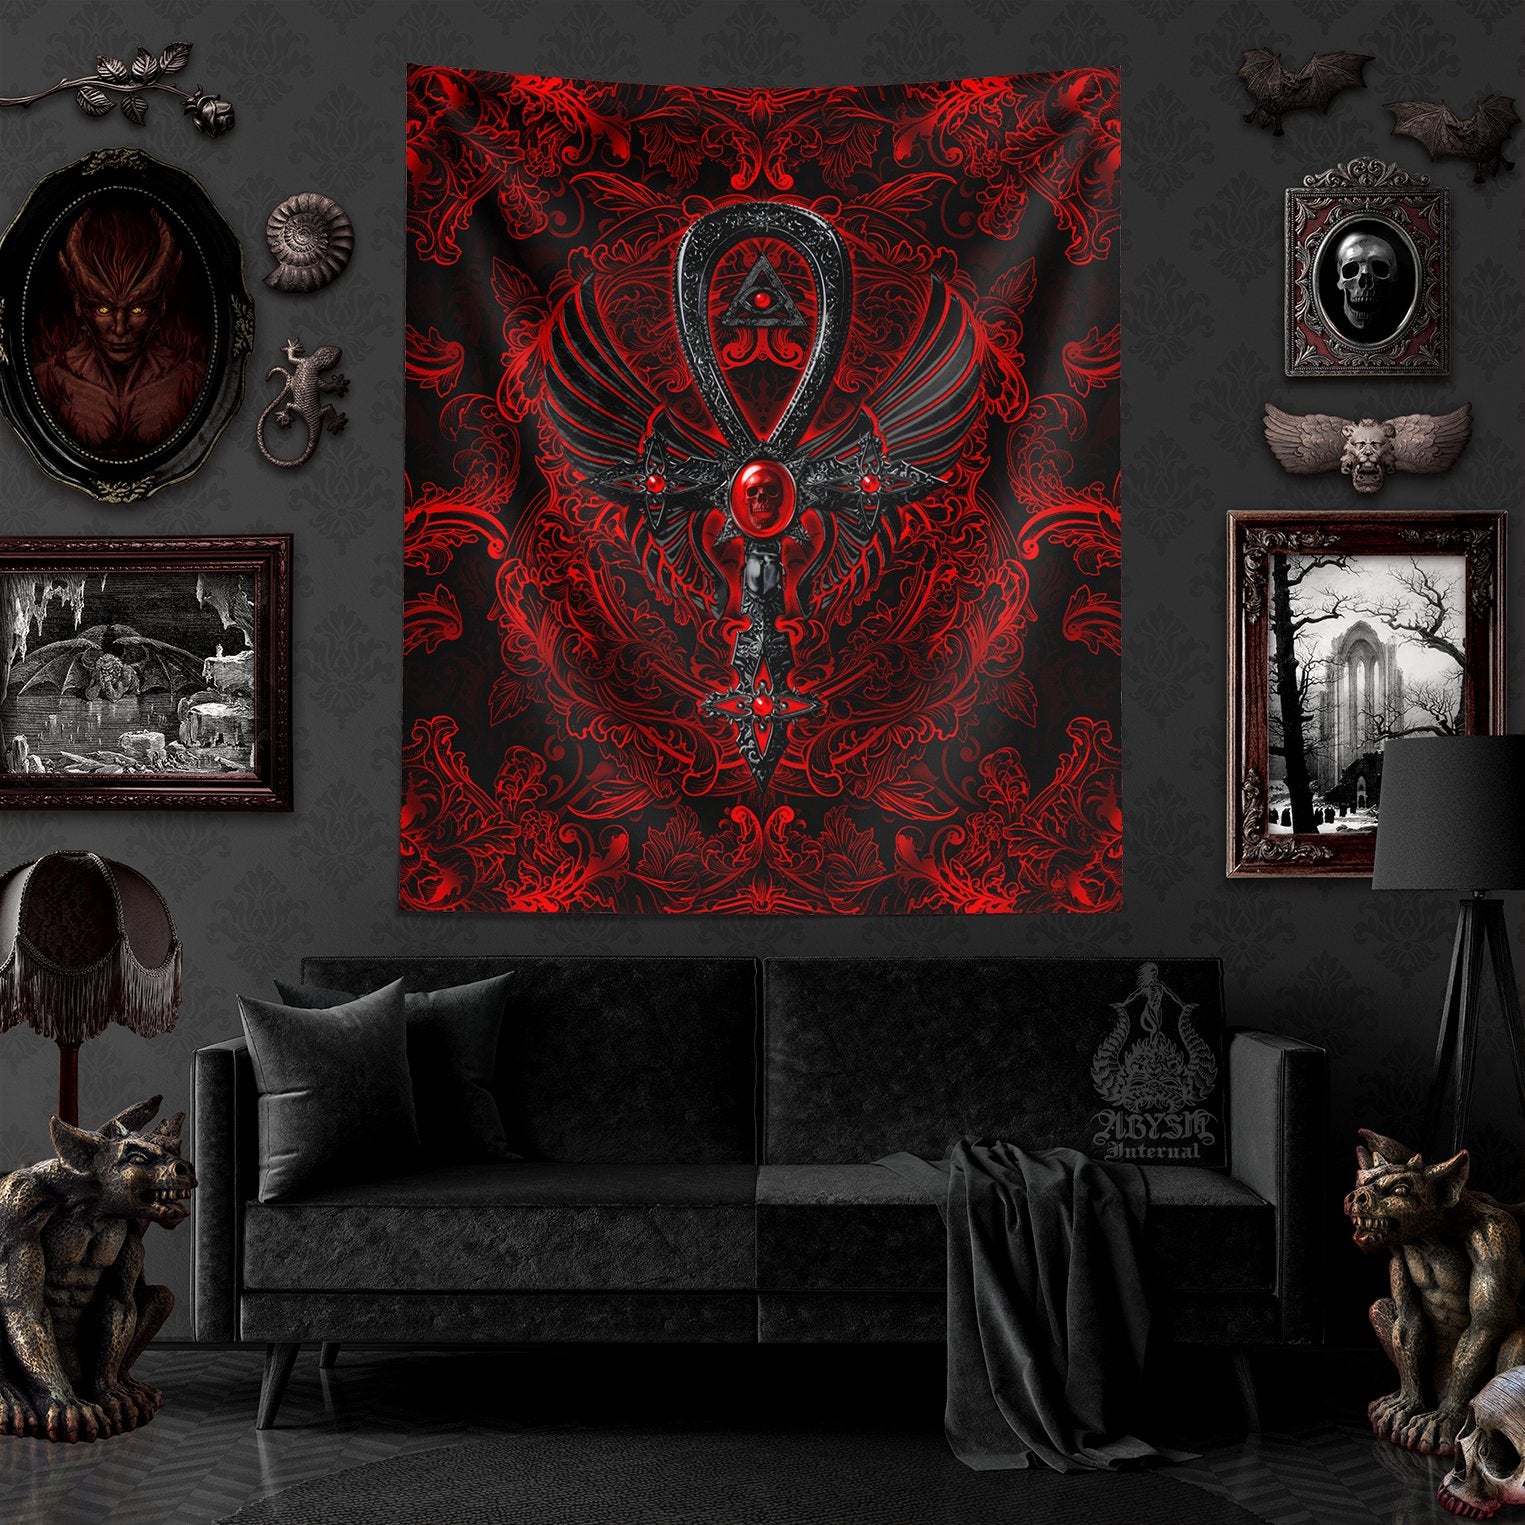 Gothic Cross Tapestry, Goth Wall Hanging, Occult Home Decor, Vertical Art Print - Dark Red & Black Ankh - Abysm Internal